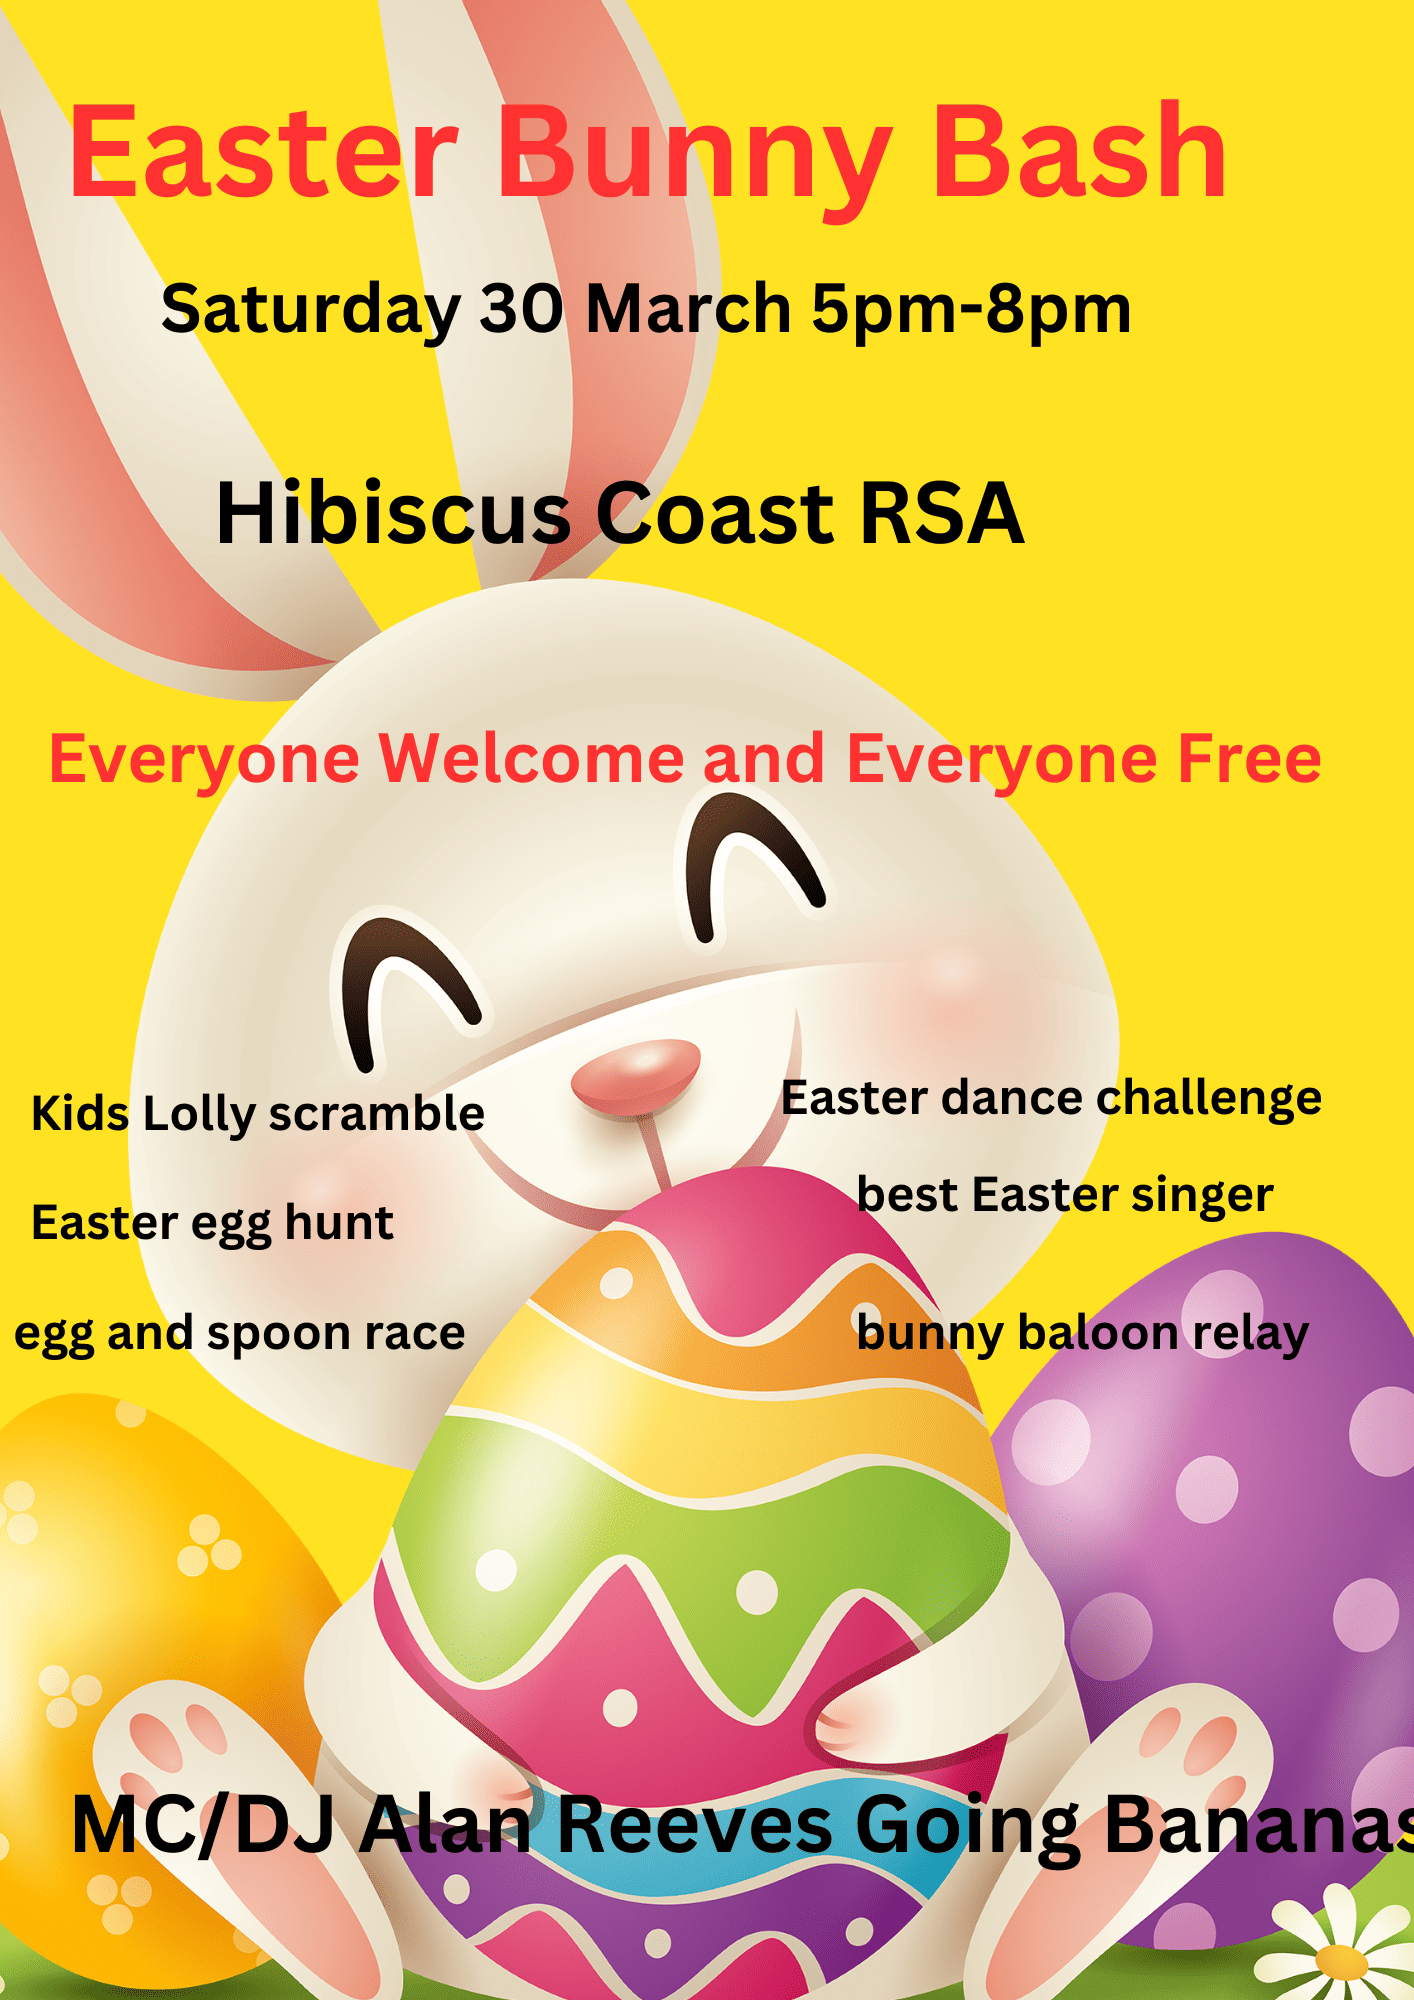 Colorful Easter event flyer with activities and entertainment details.